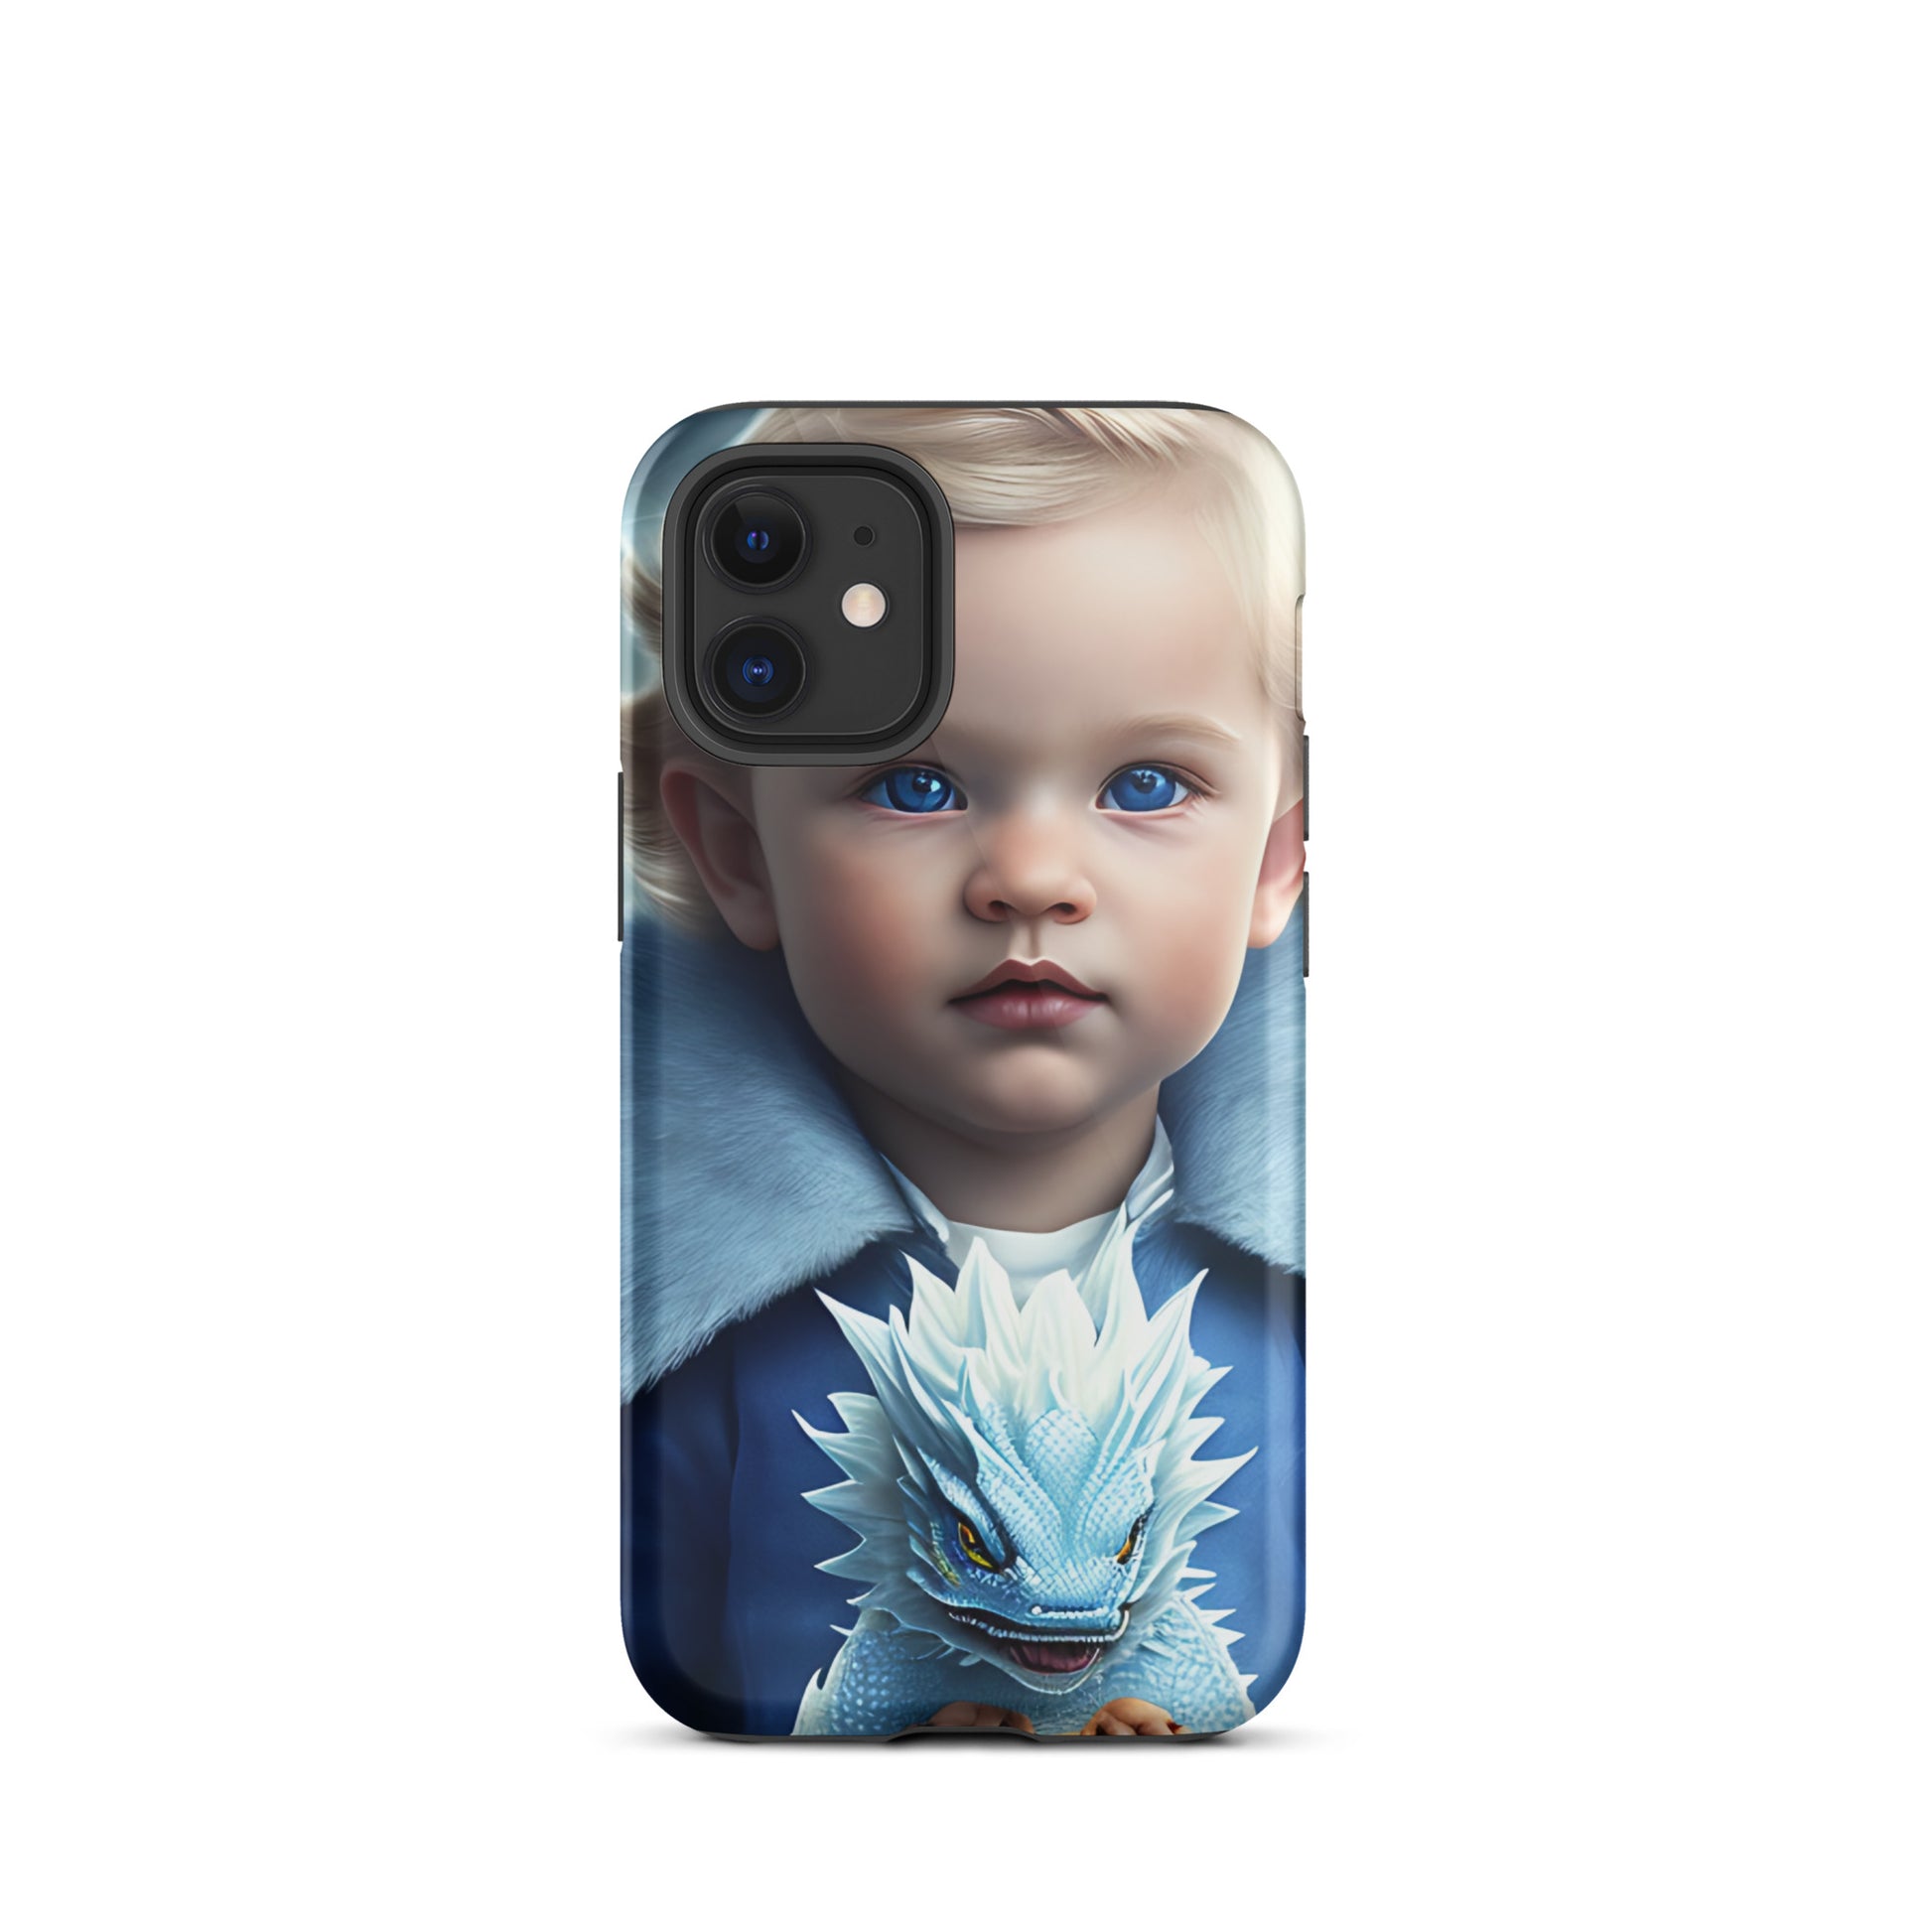 A picture of a an iphone case with a blond haired blue eyed boy, blue top holding a baby ice dragon in front - Dragon Prince #2 tough iphone case - glossy-iphone-12-mini-front